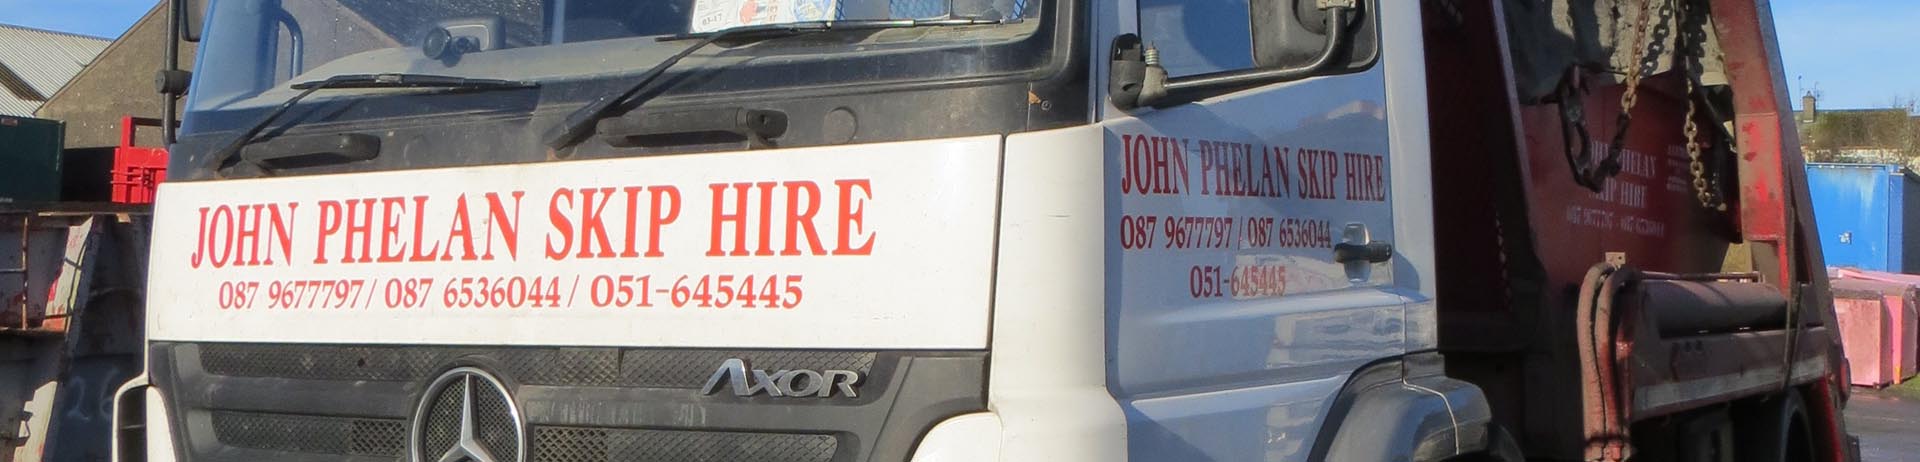 skip hire in wexford image